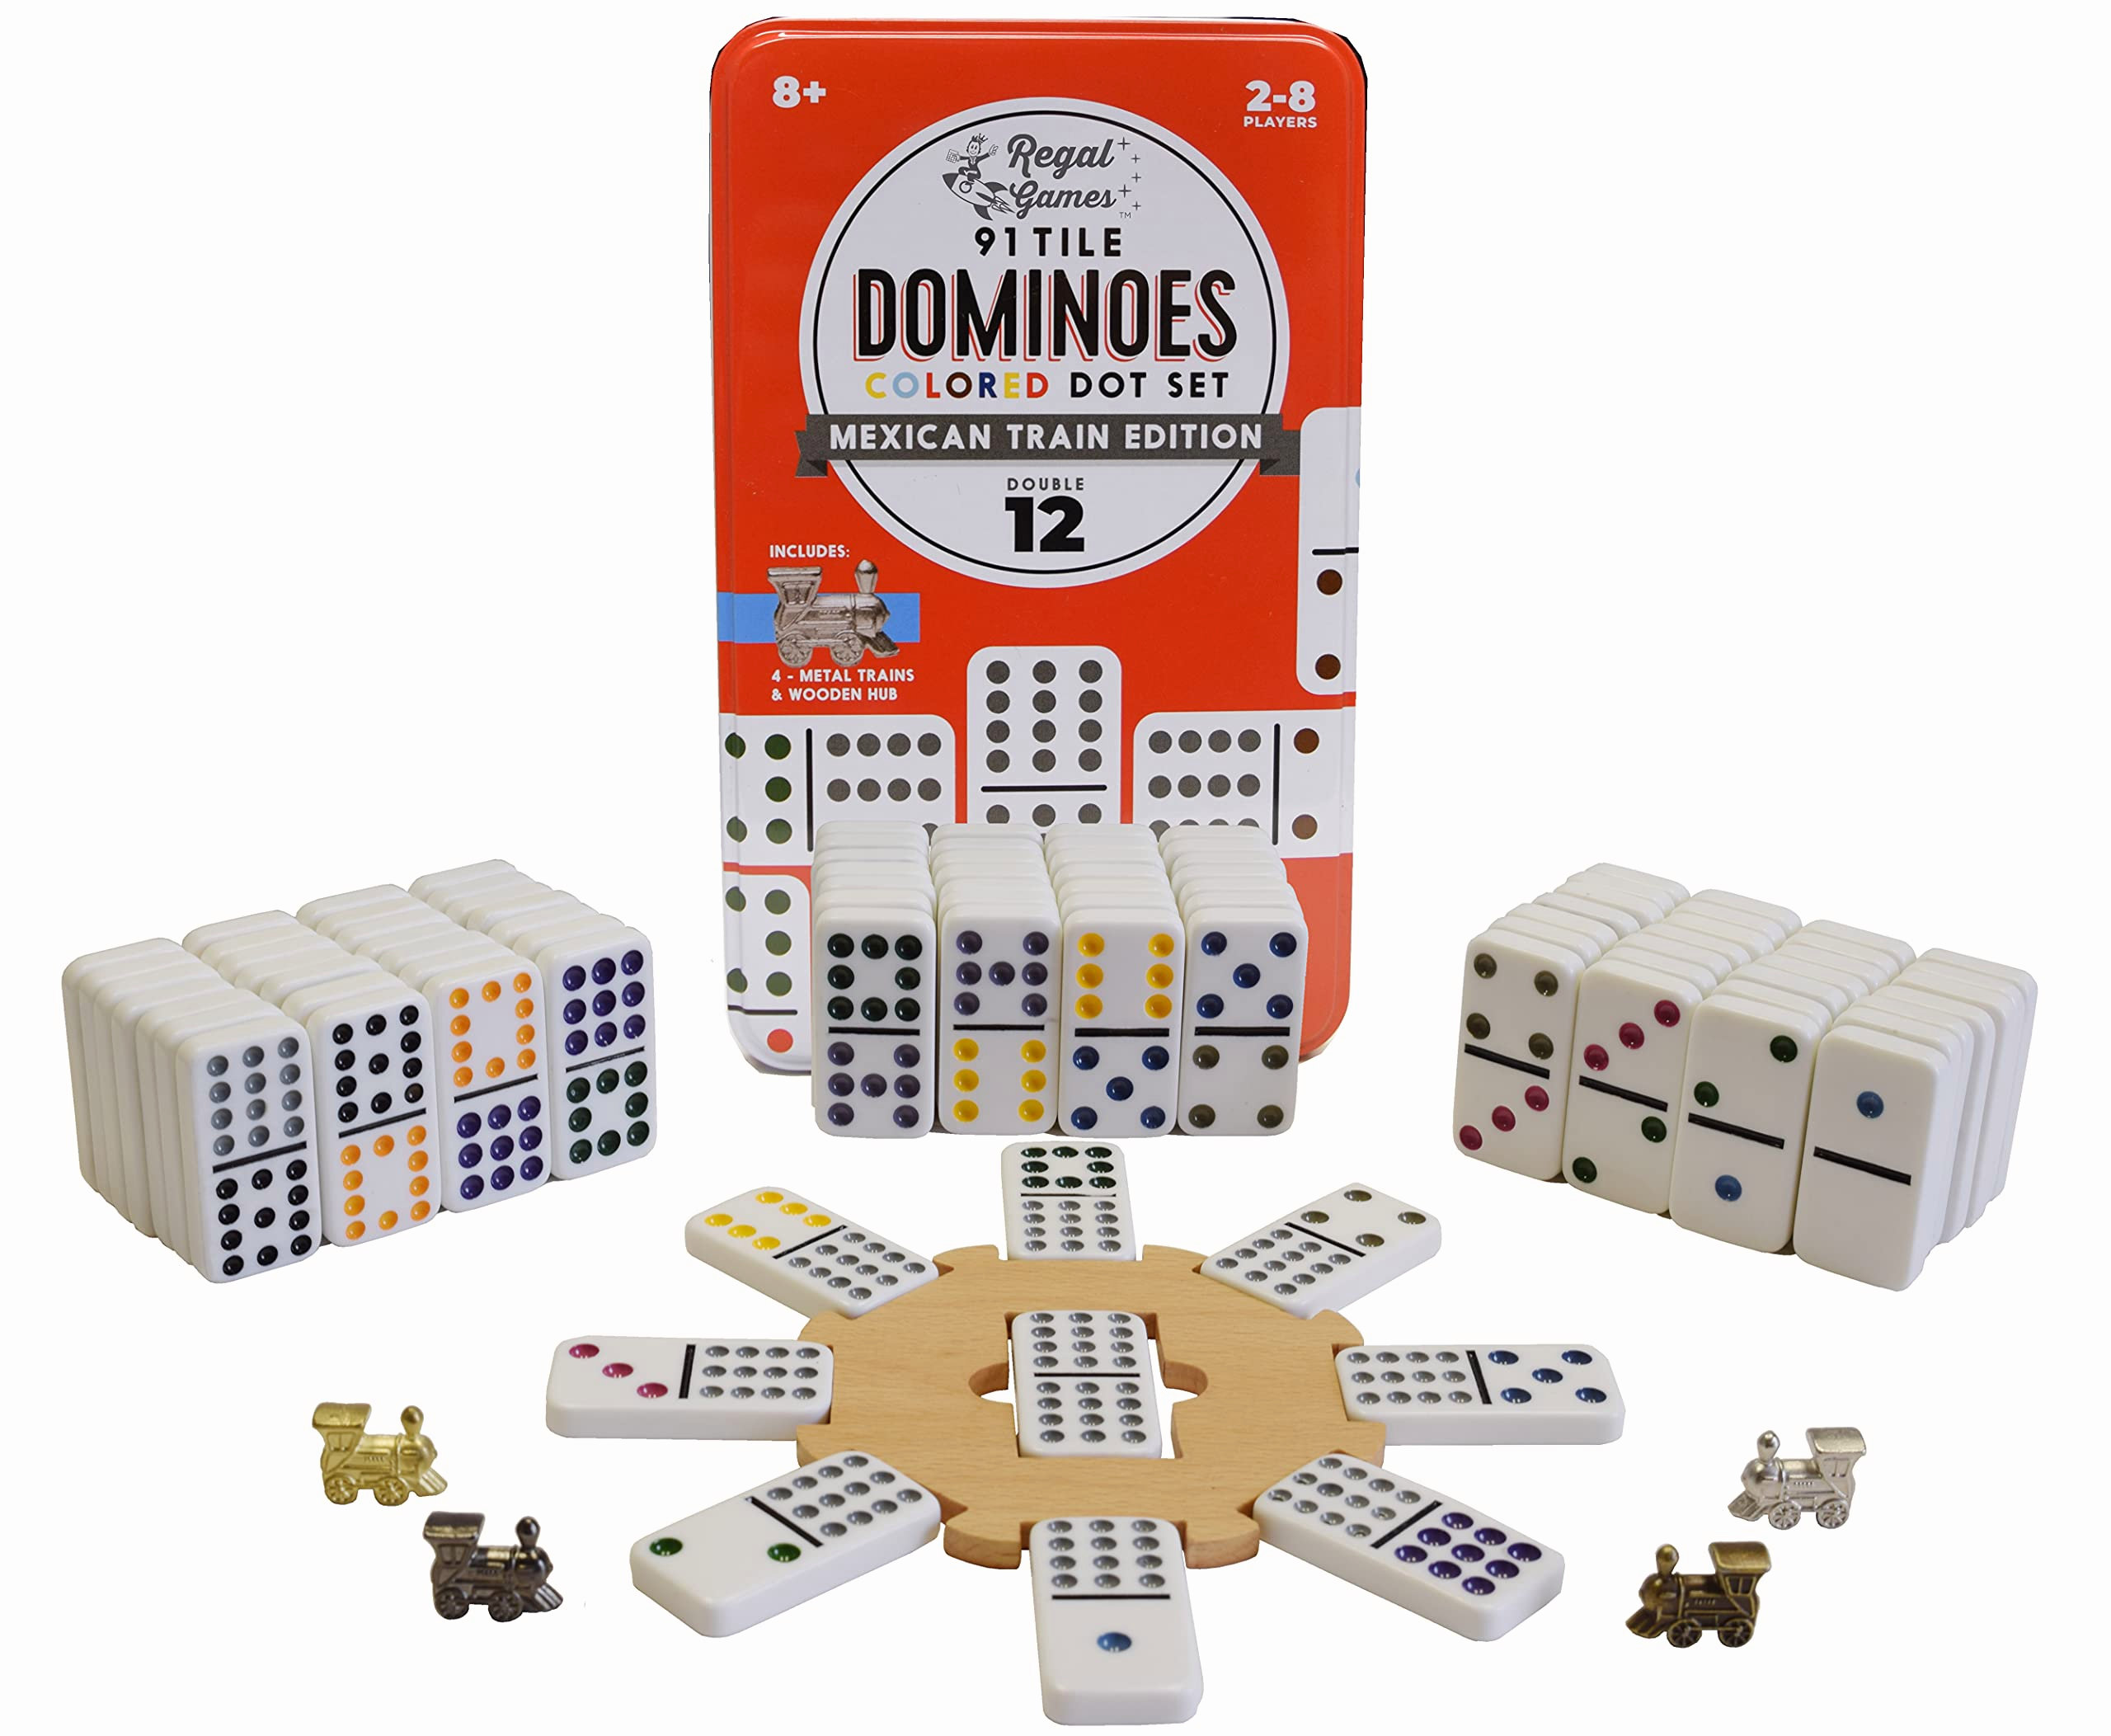 Korting Overweldigend gen MELODY Double 12 Colored Dot Dominoes Mexican Train Game Set With Wooden  Hub, 91 Domino Tiles, 4 Metal Trains, And Collectors Tin | Wayfair